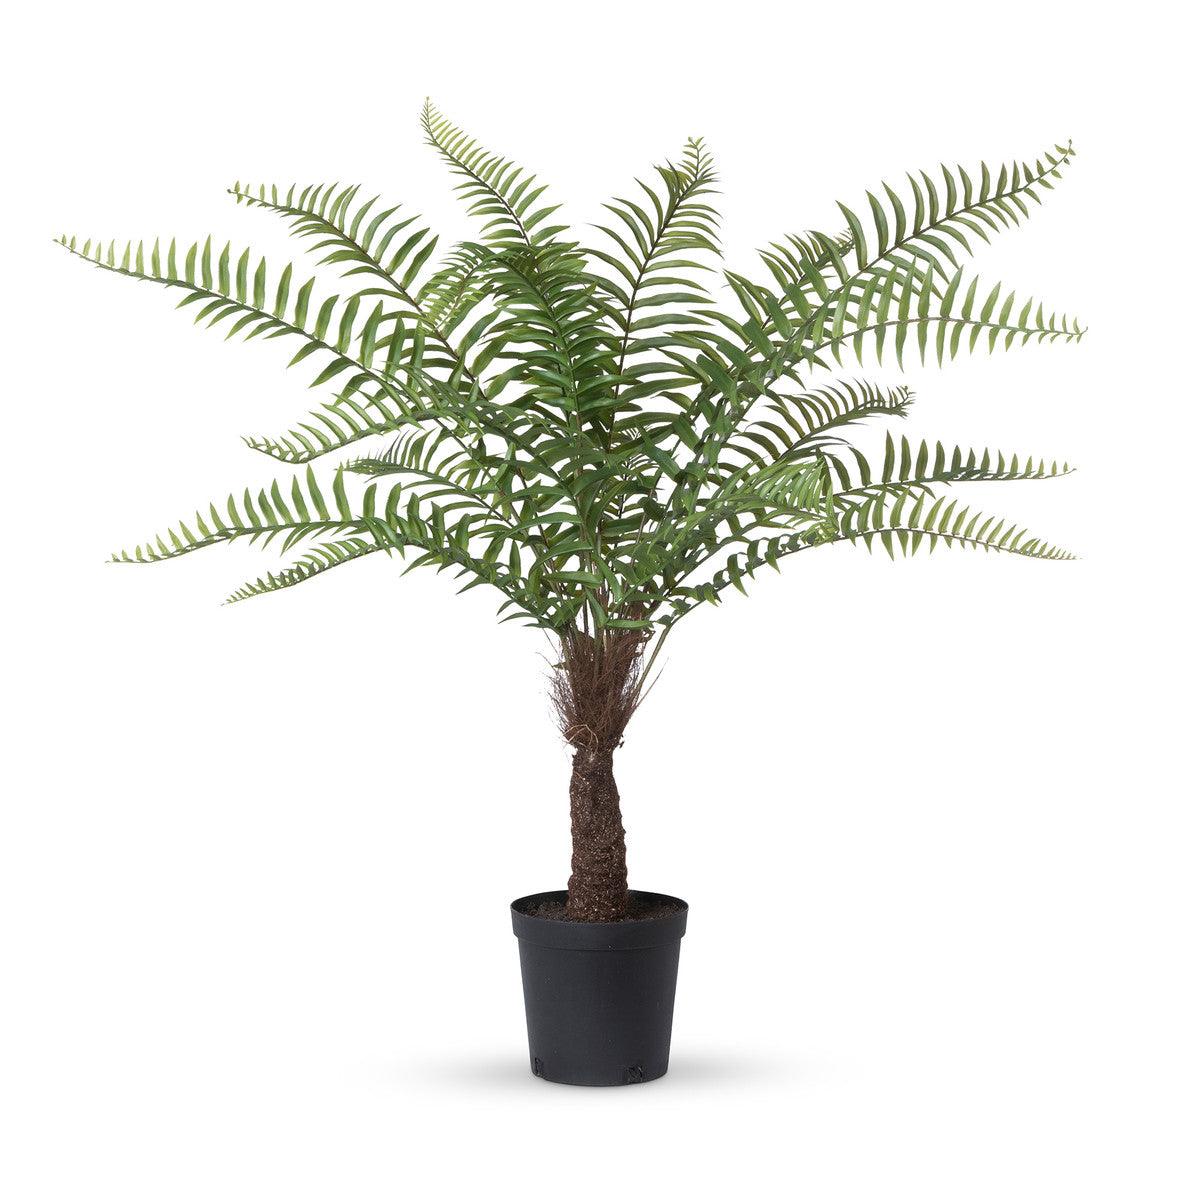 Giant Tree Fern in Growers Pot, 44 in. - Signastyle Boutique